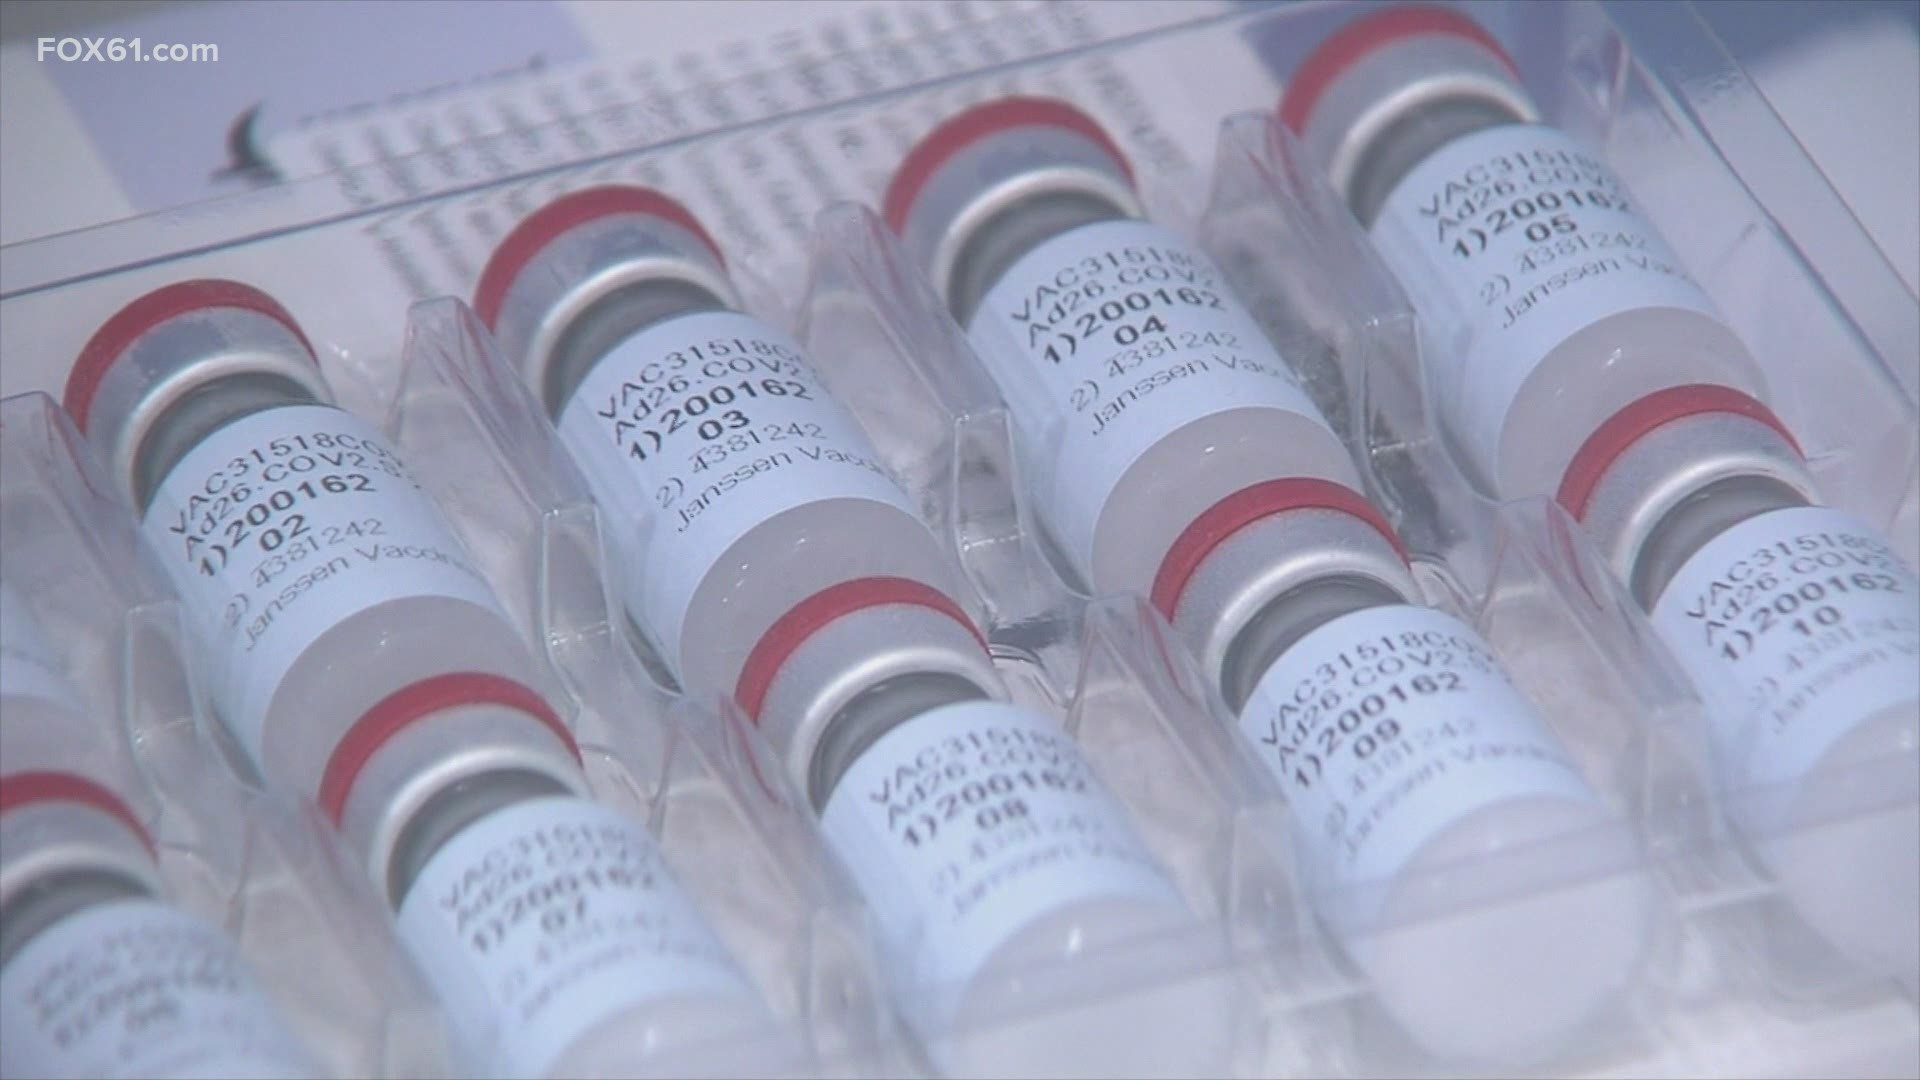 The agencies said it was investigating clots in six women in the days after vaccination. More than 6.8 million doses of the J&J vaccine have been administered.